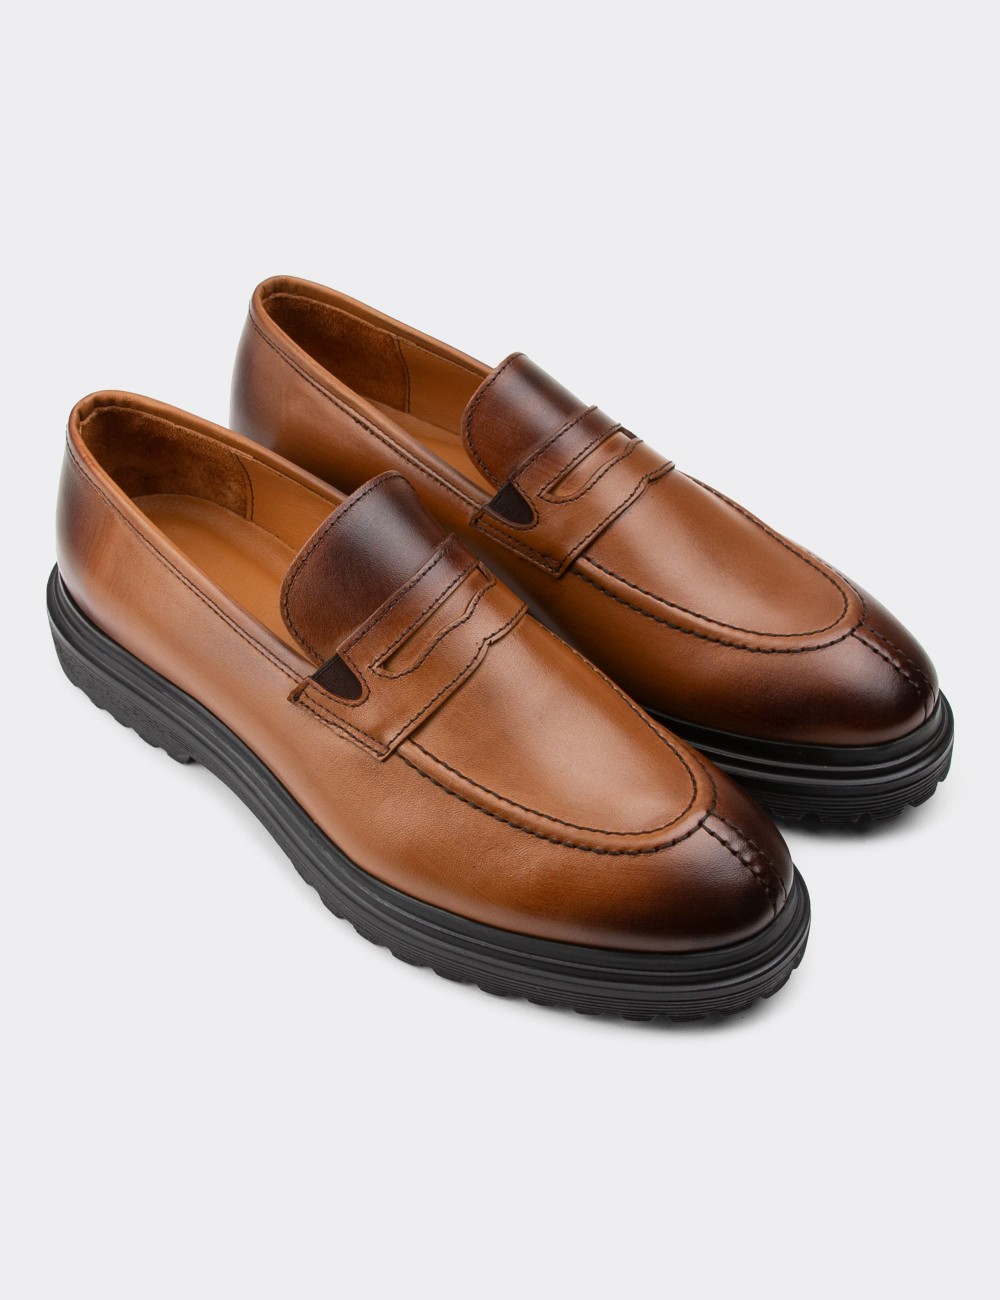 Tan Leather Loafers - 01878MTBAE01